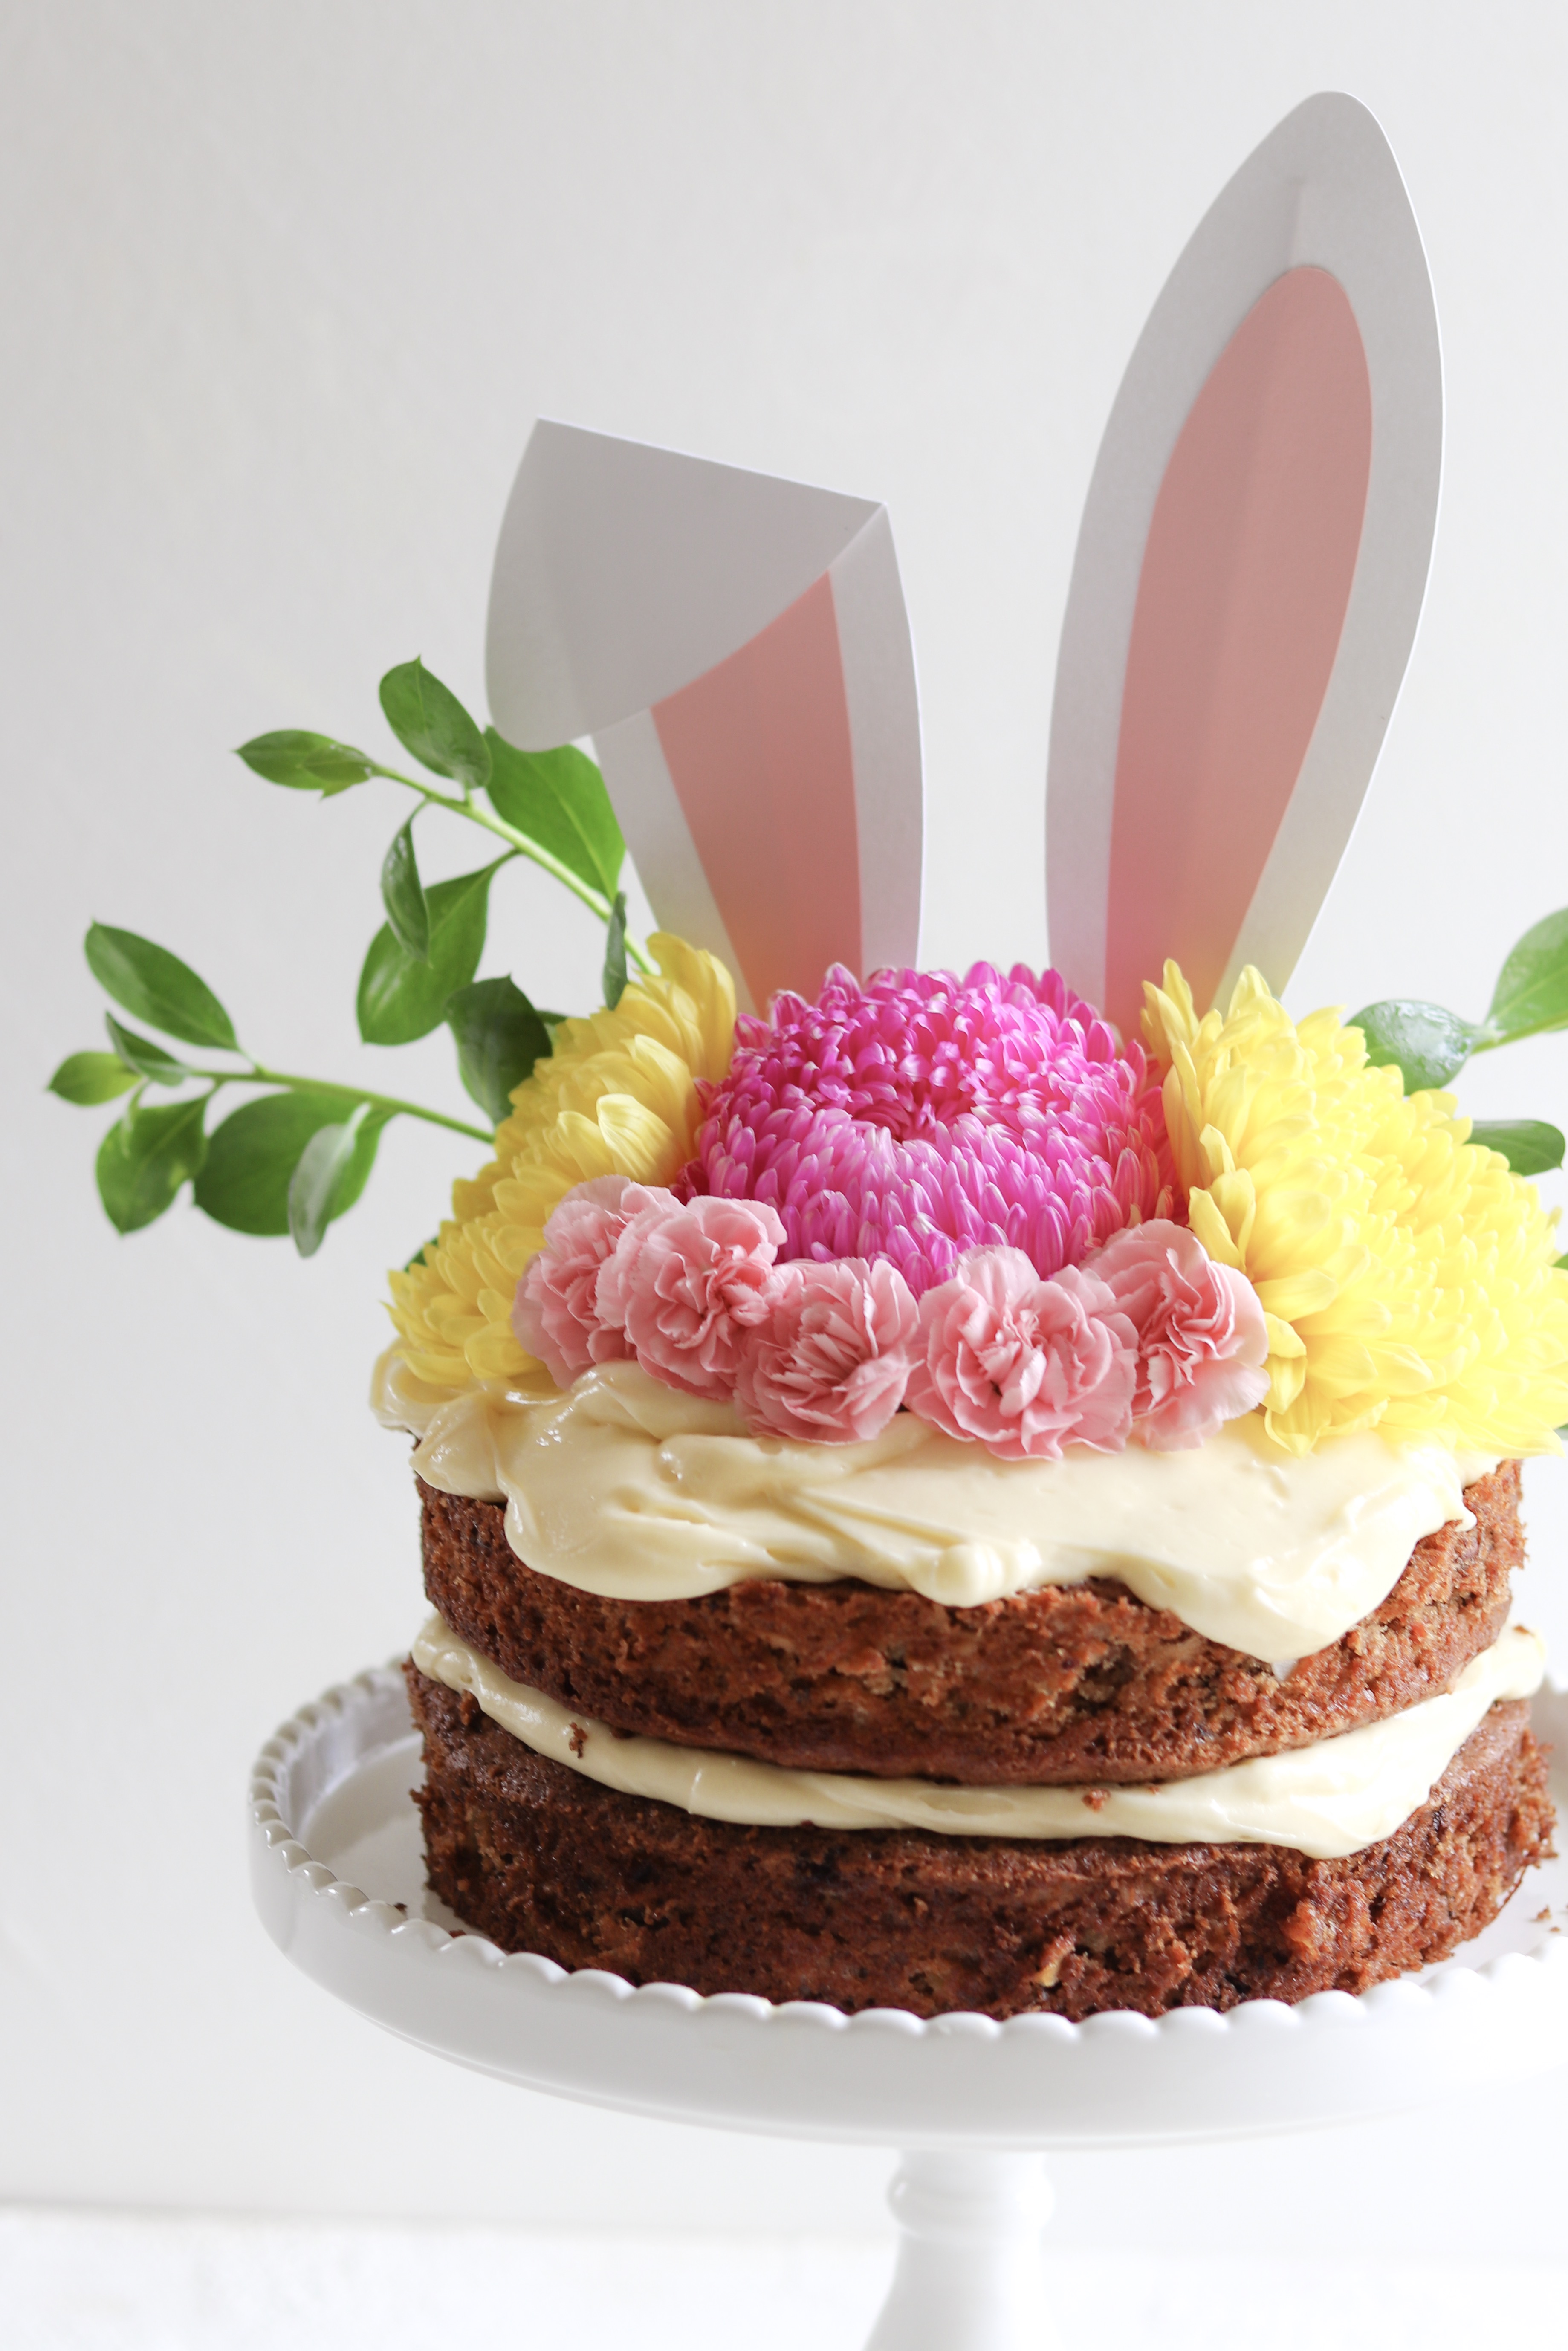 A delicious carrot cake with lashings of cream cheese frosting, decorated for Easter with flowers and bunny ears